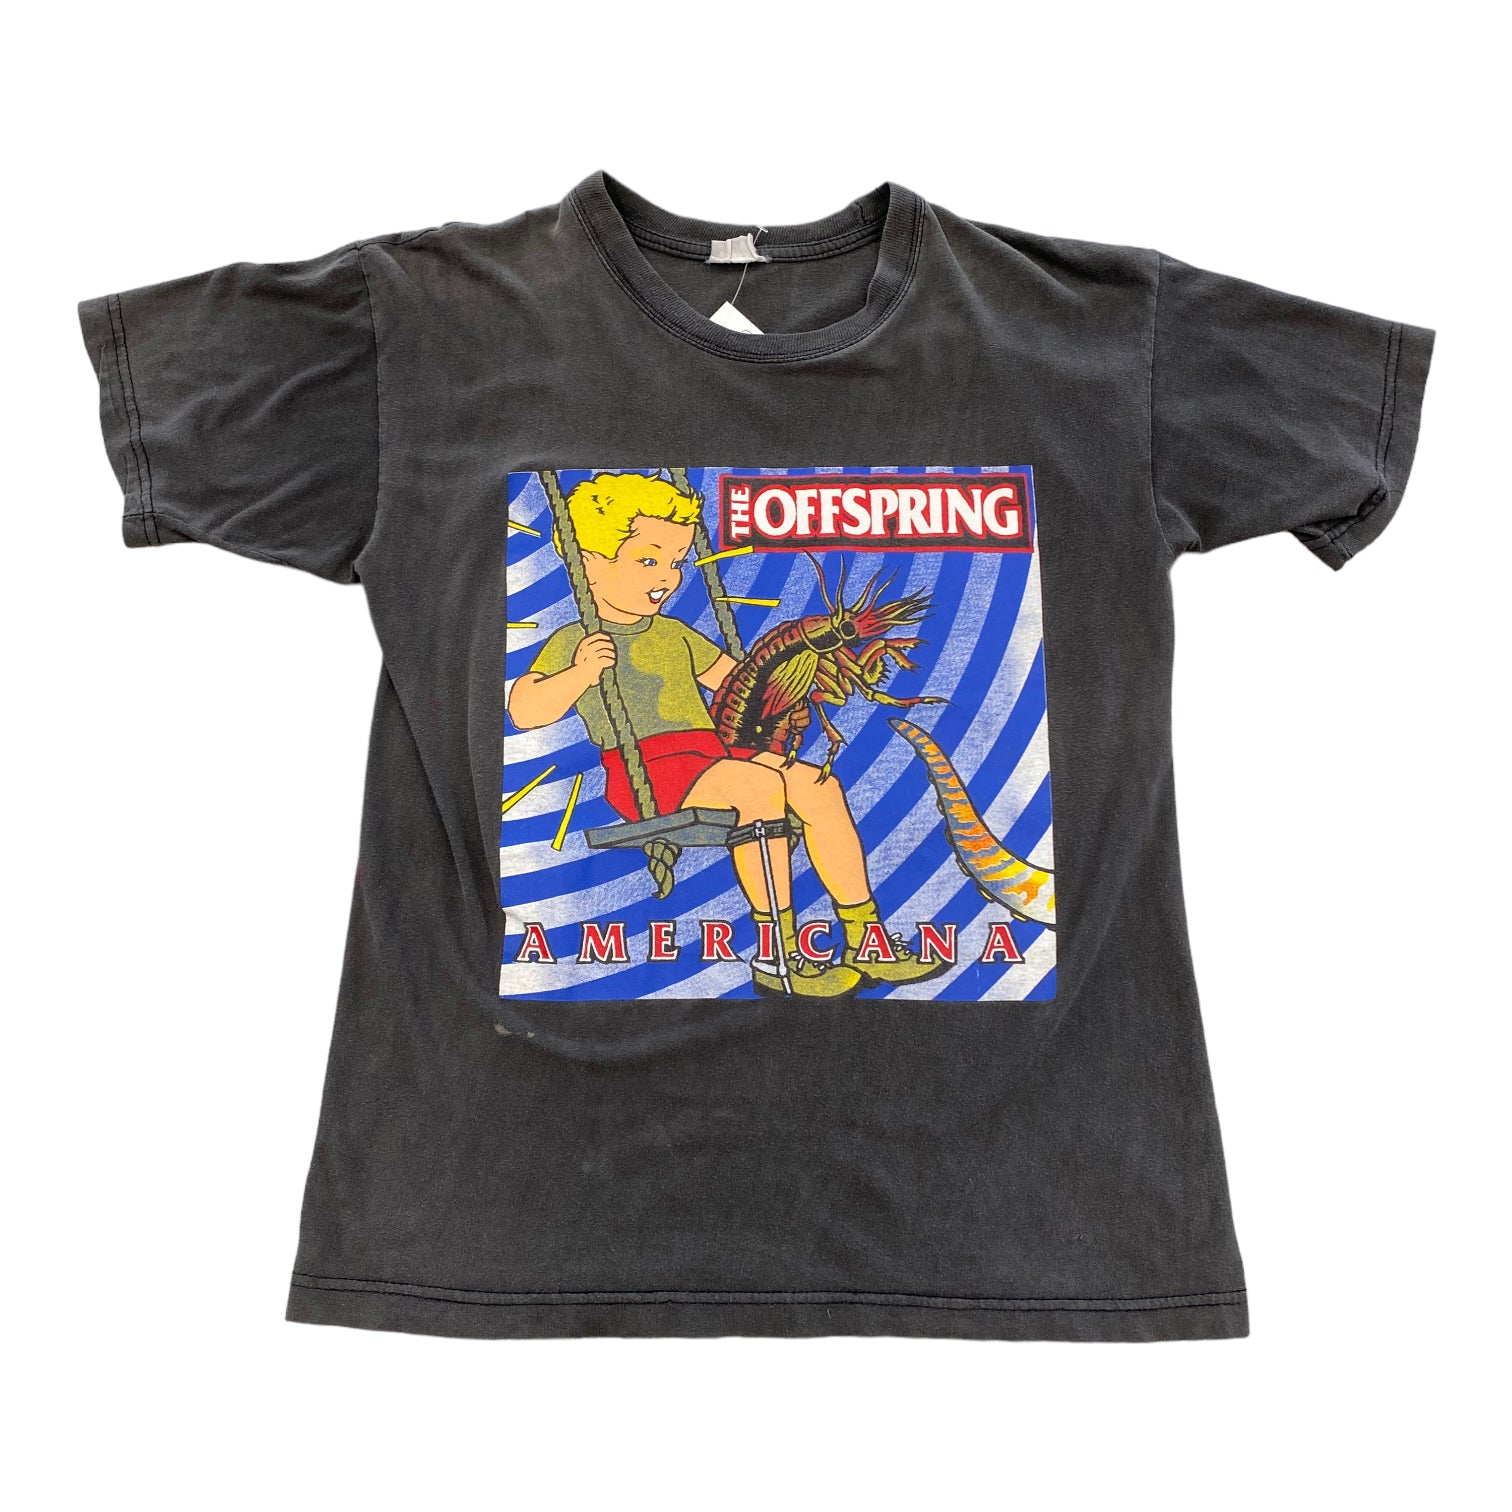 1999 The Offspring Americana Album Vintage T-shirt – The Pop up